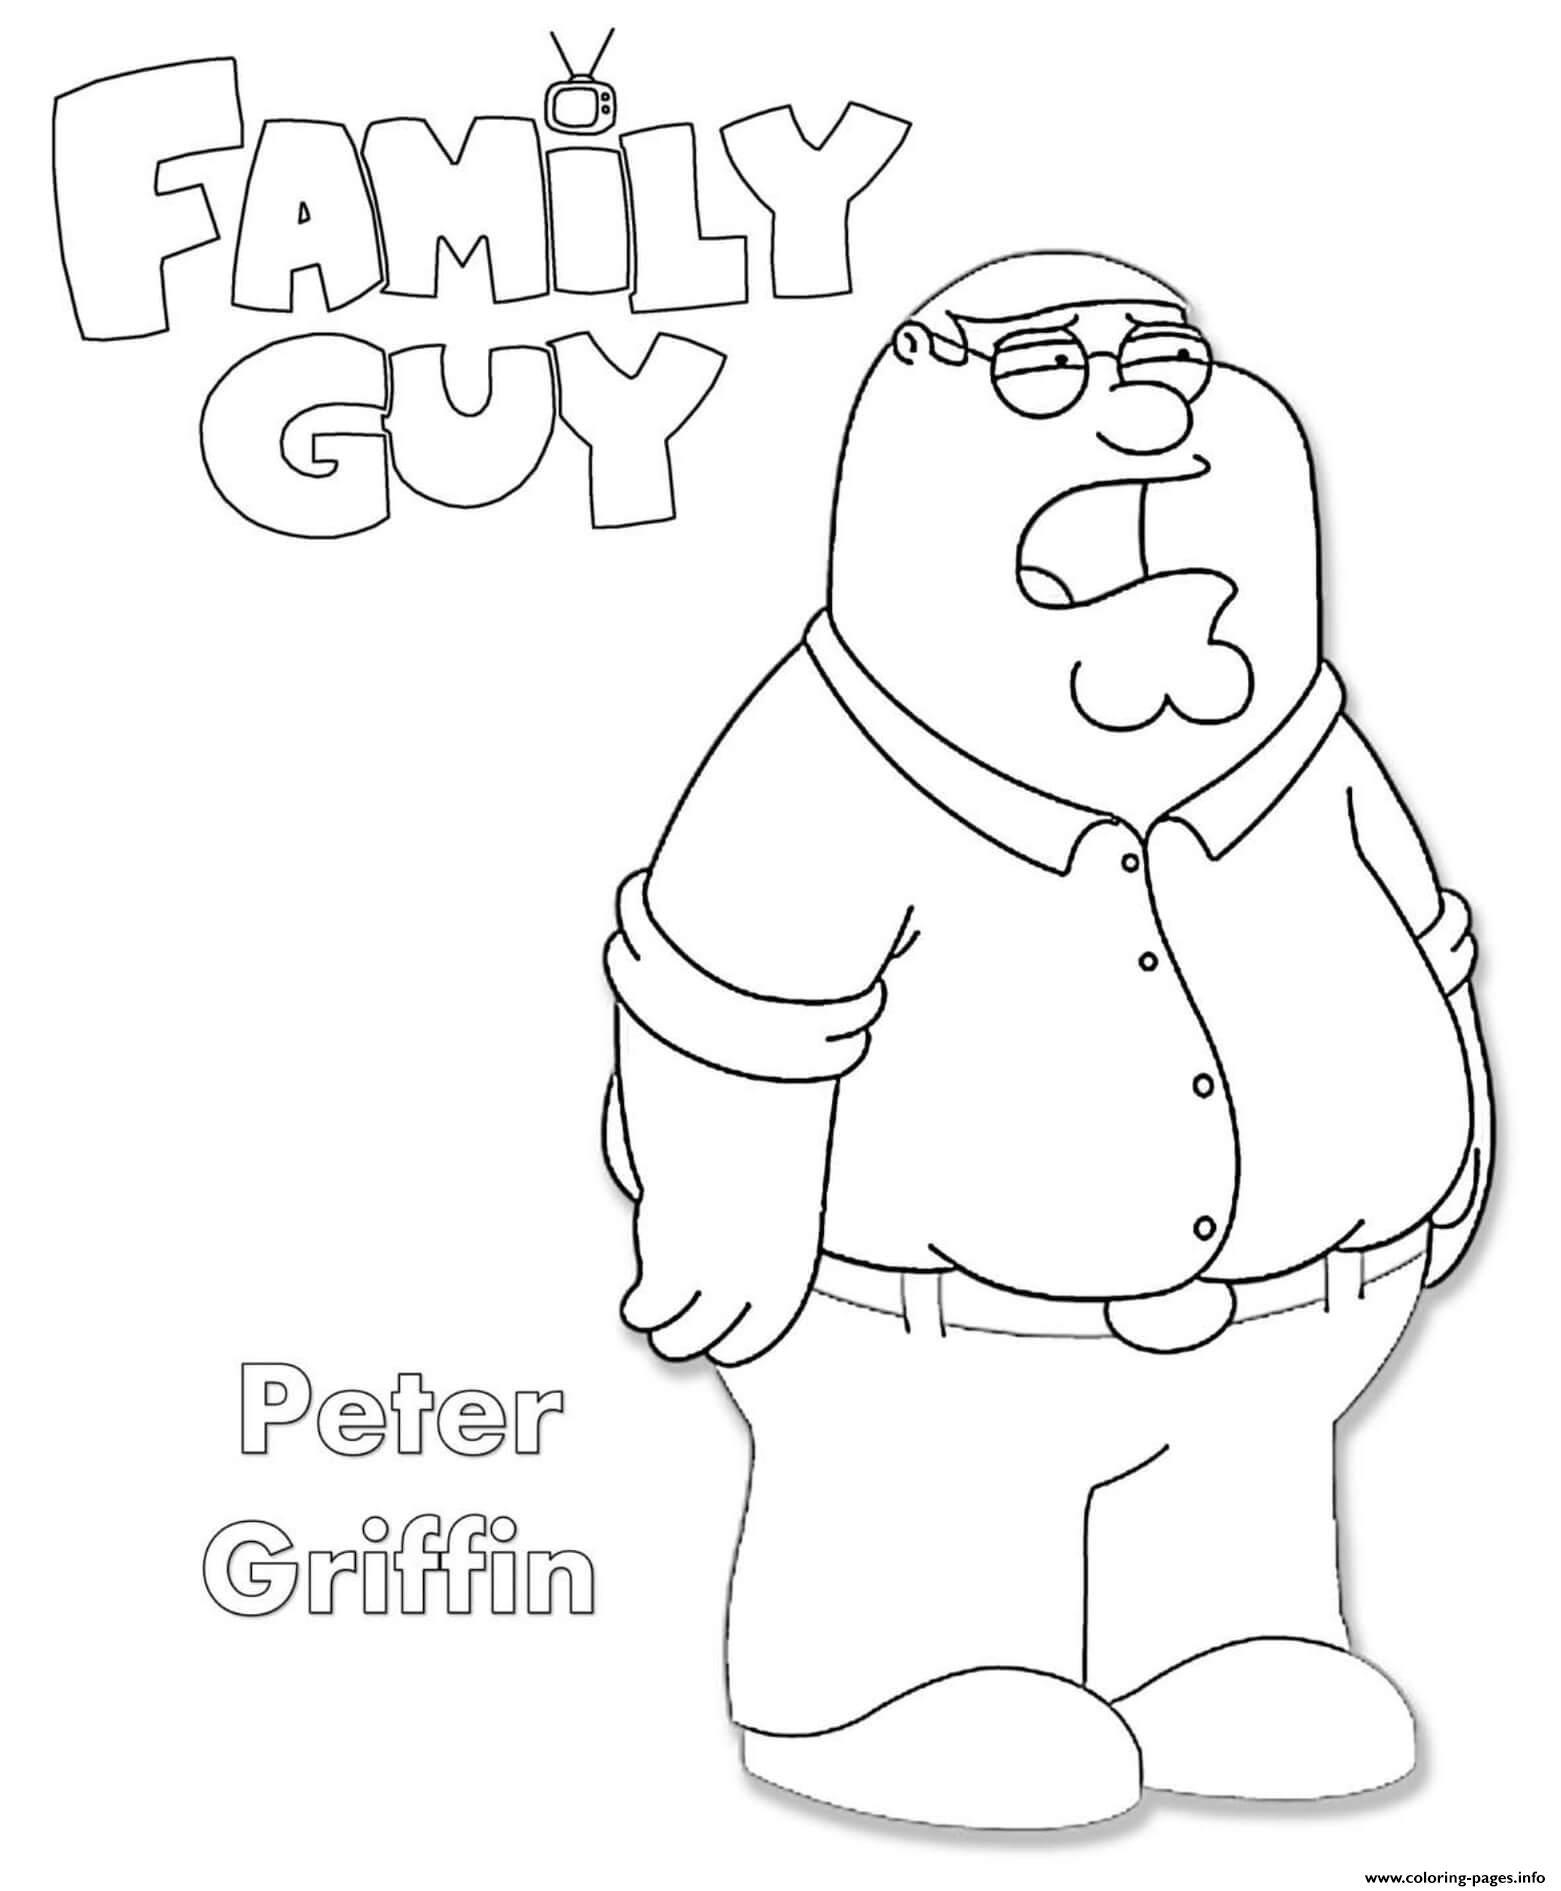 Family guy peter griffin coloring page printable